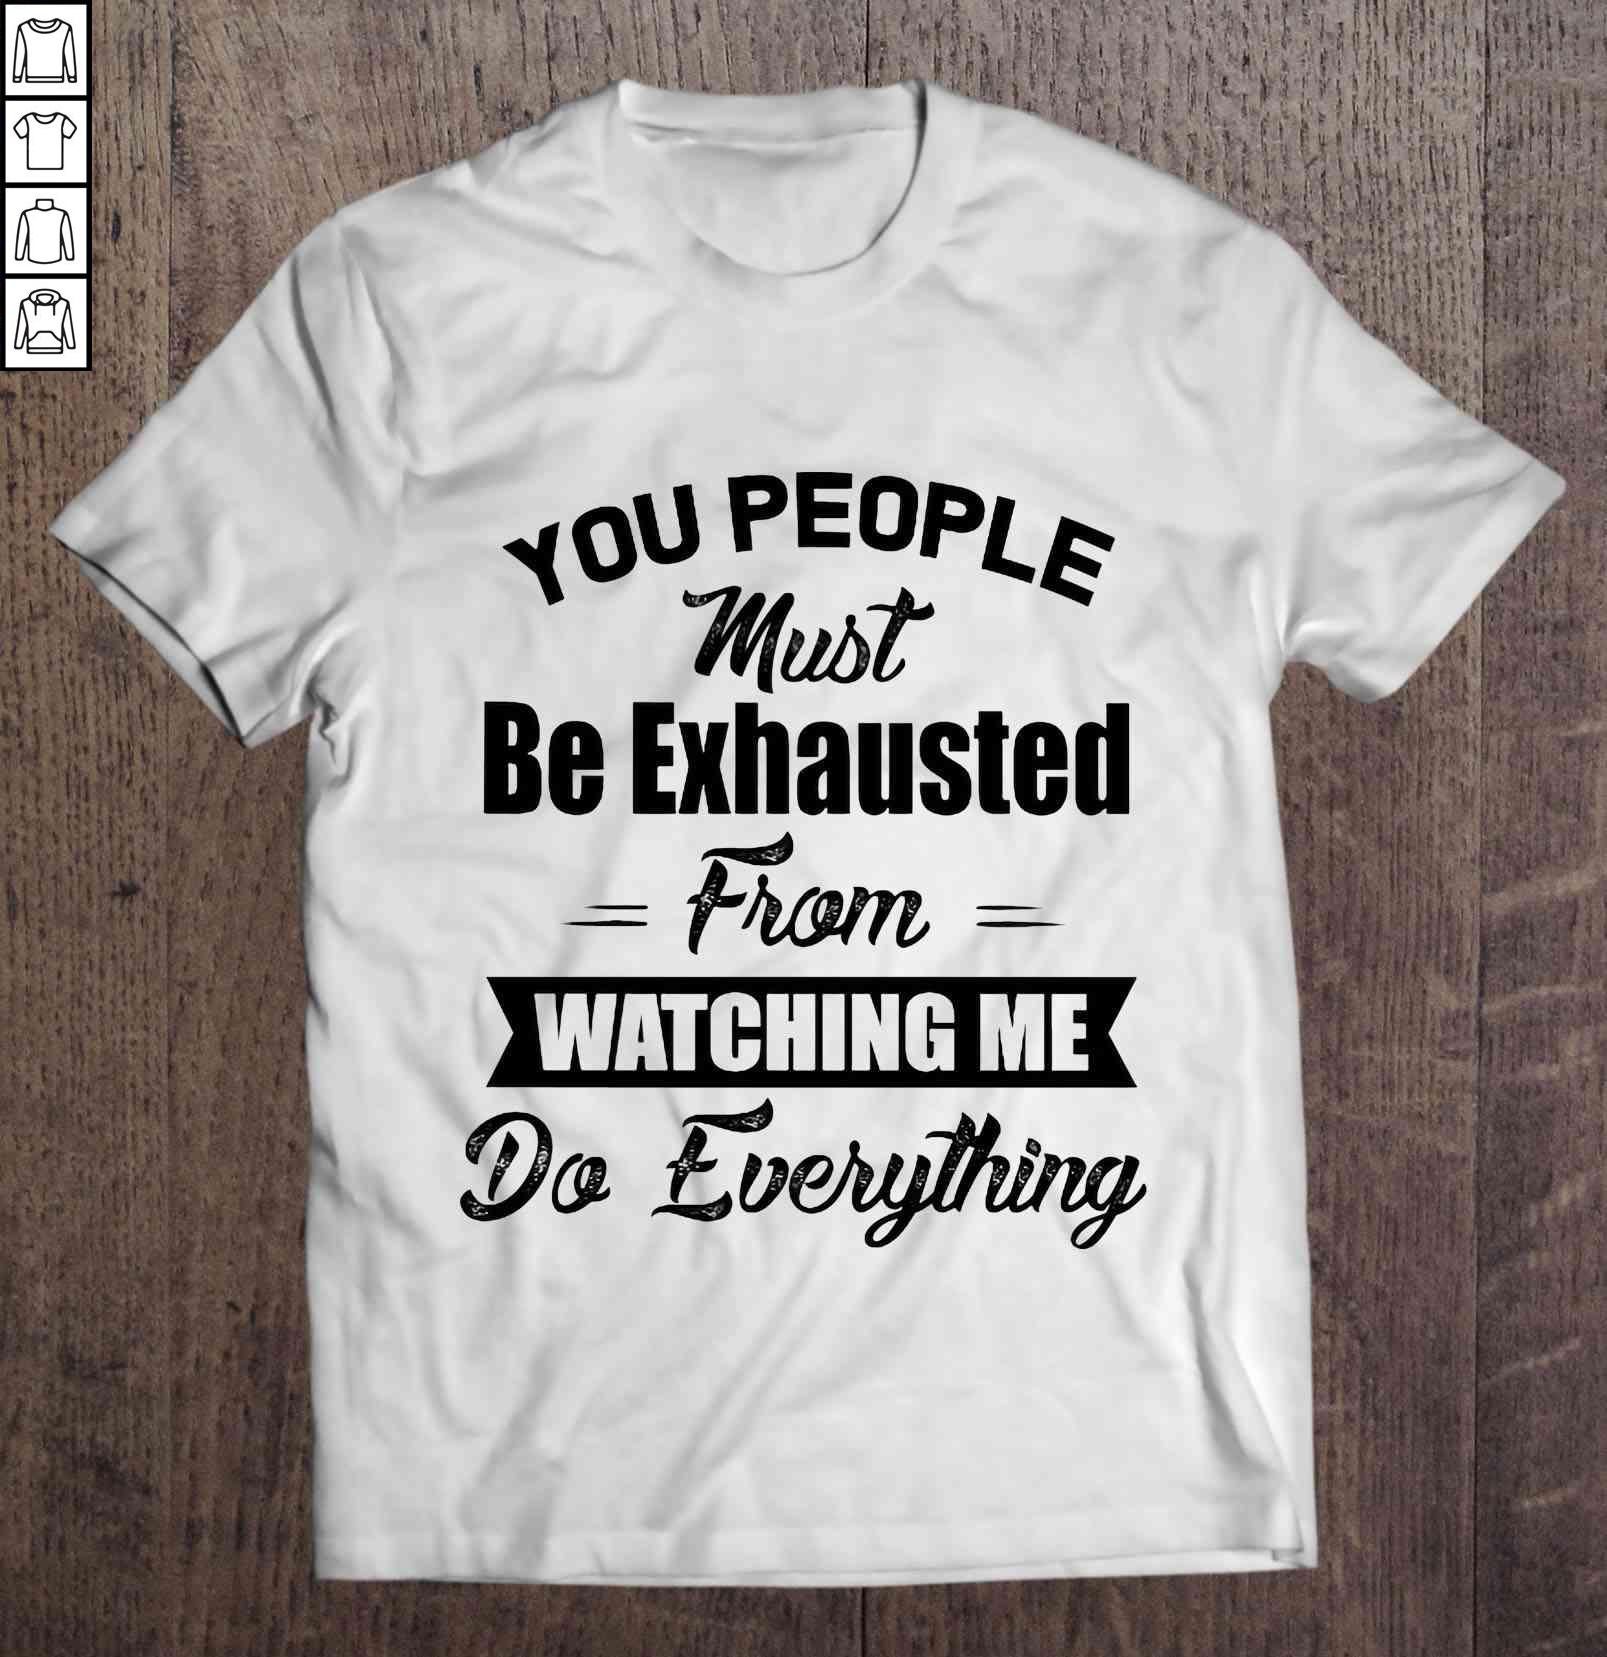 You People Must Be Exhausted From Watching Me Do Everything White2 TShirt